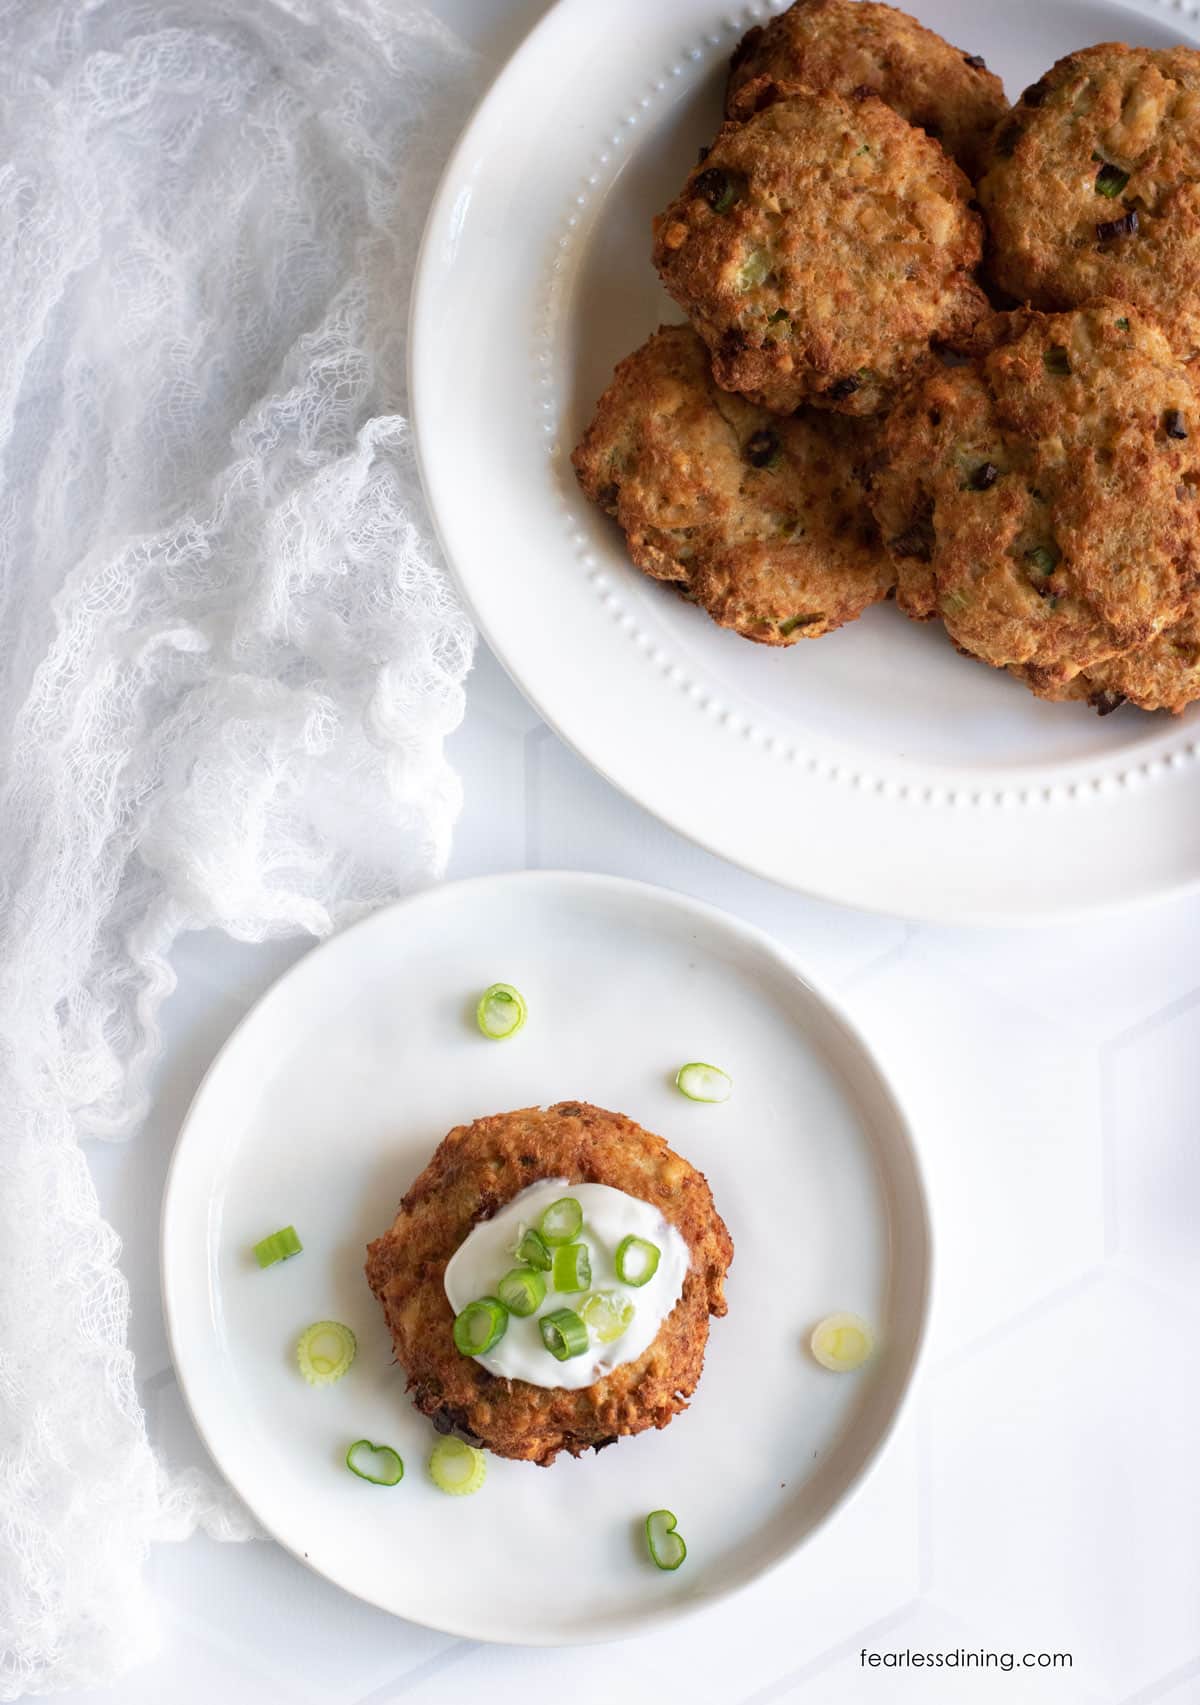 The top view of the salmon cakes on two plates.